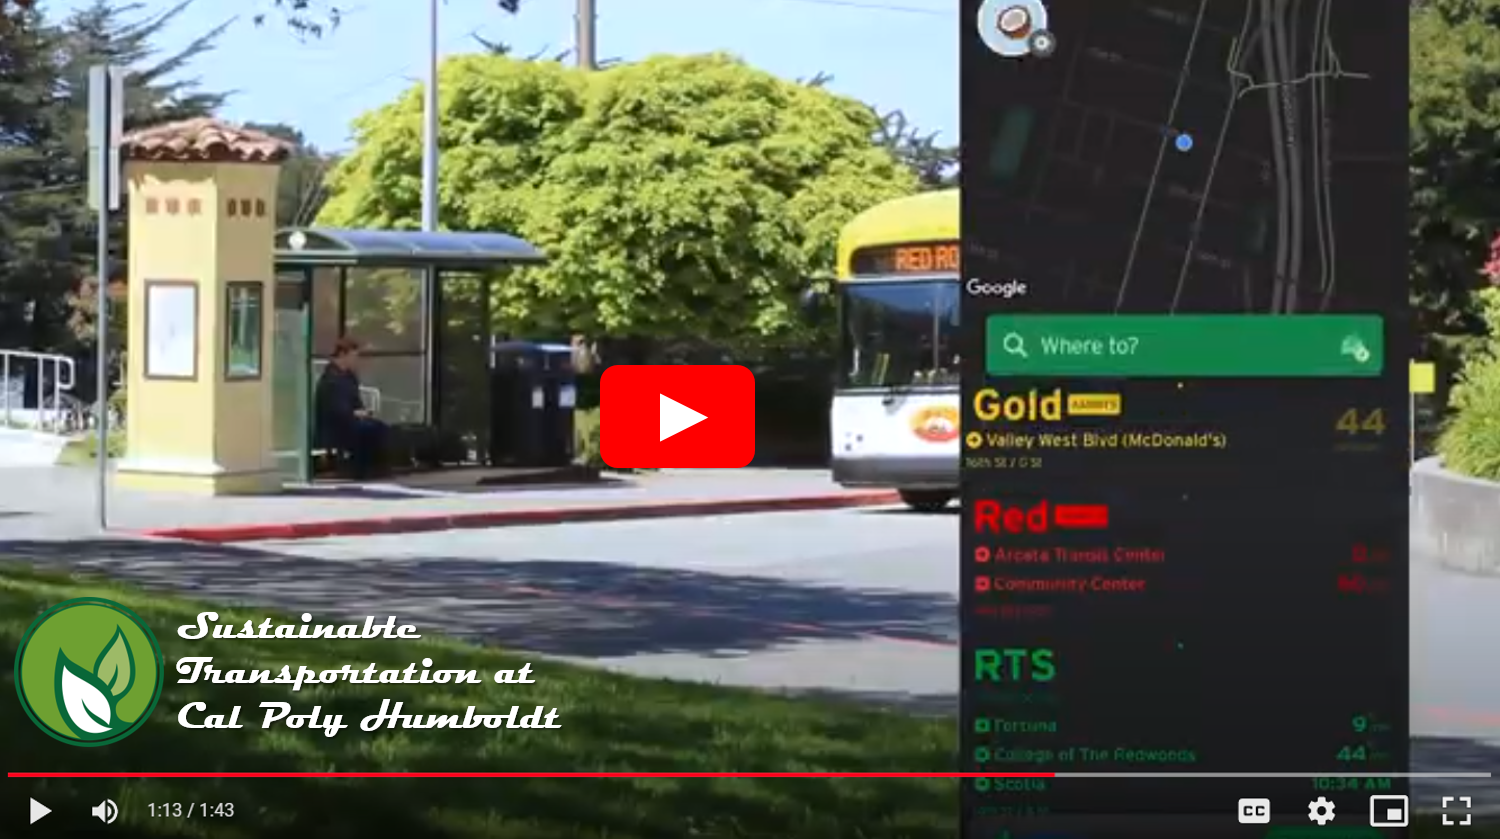 Click on this image for a short video on sustainable transportation options at Cal Poly Humboldt